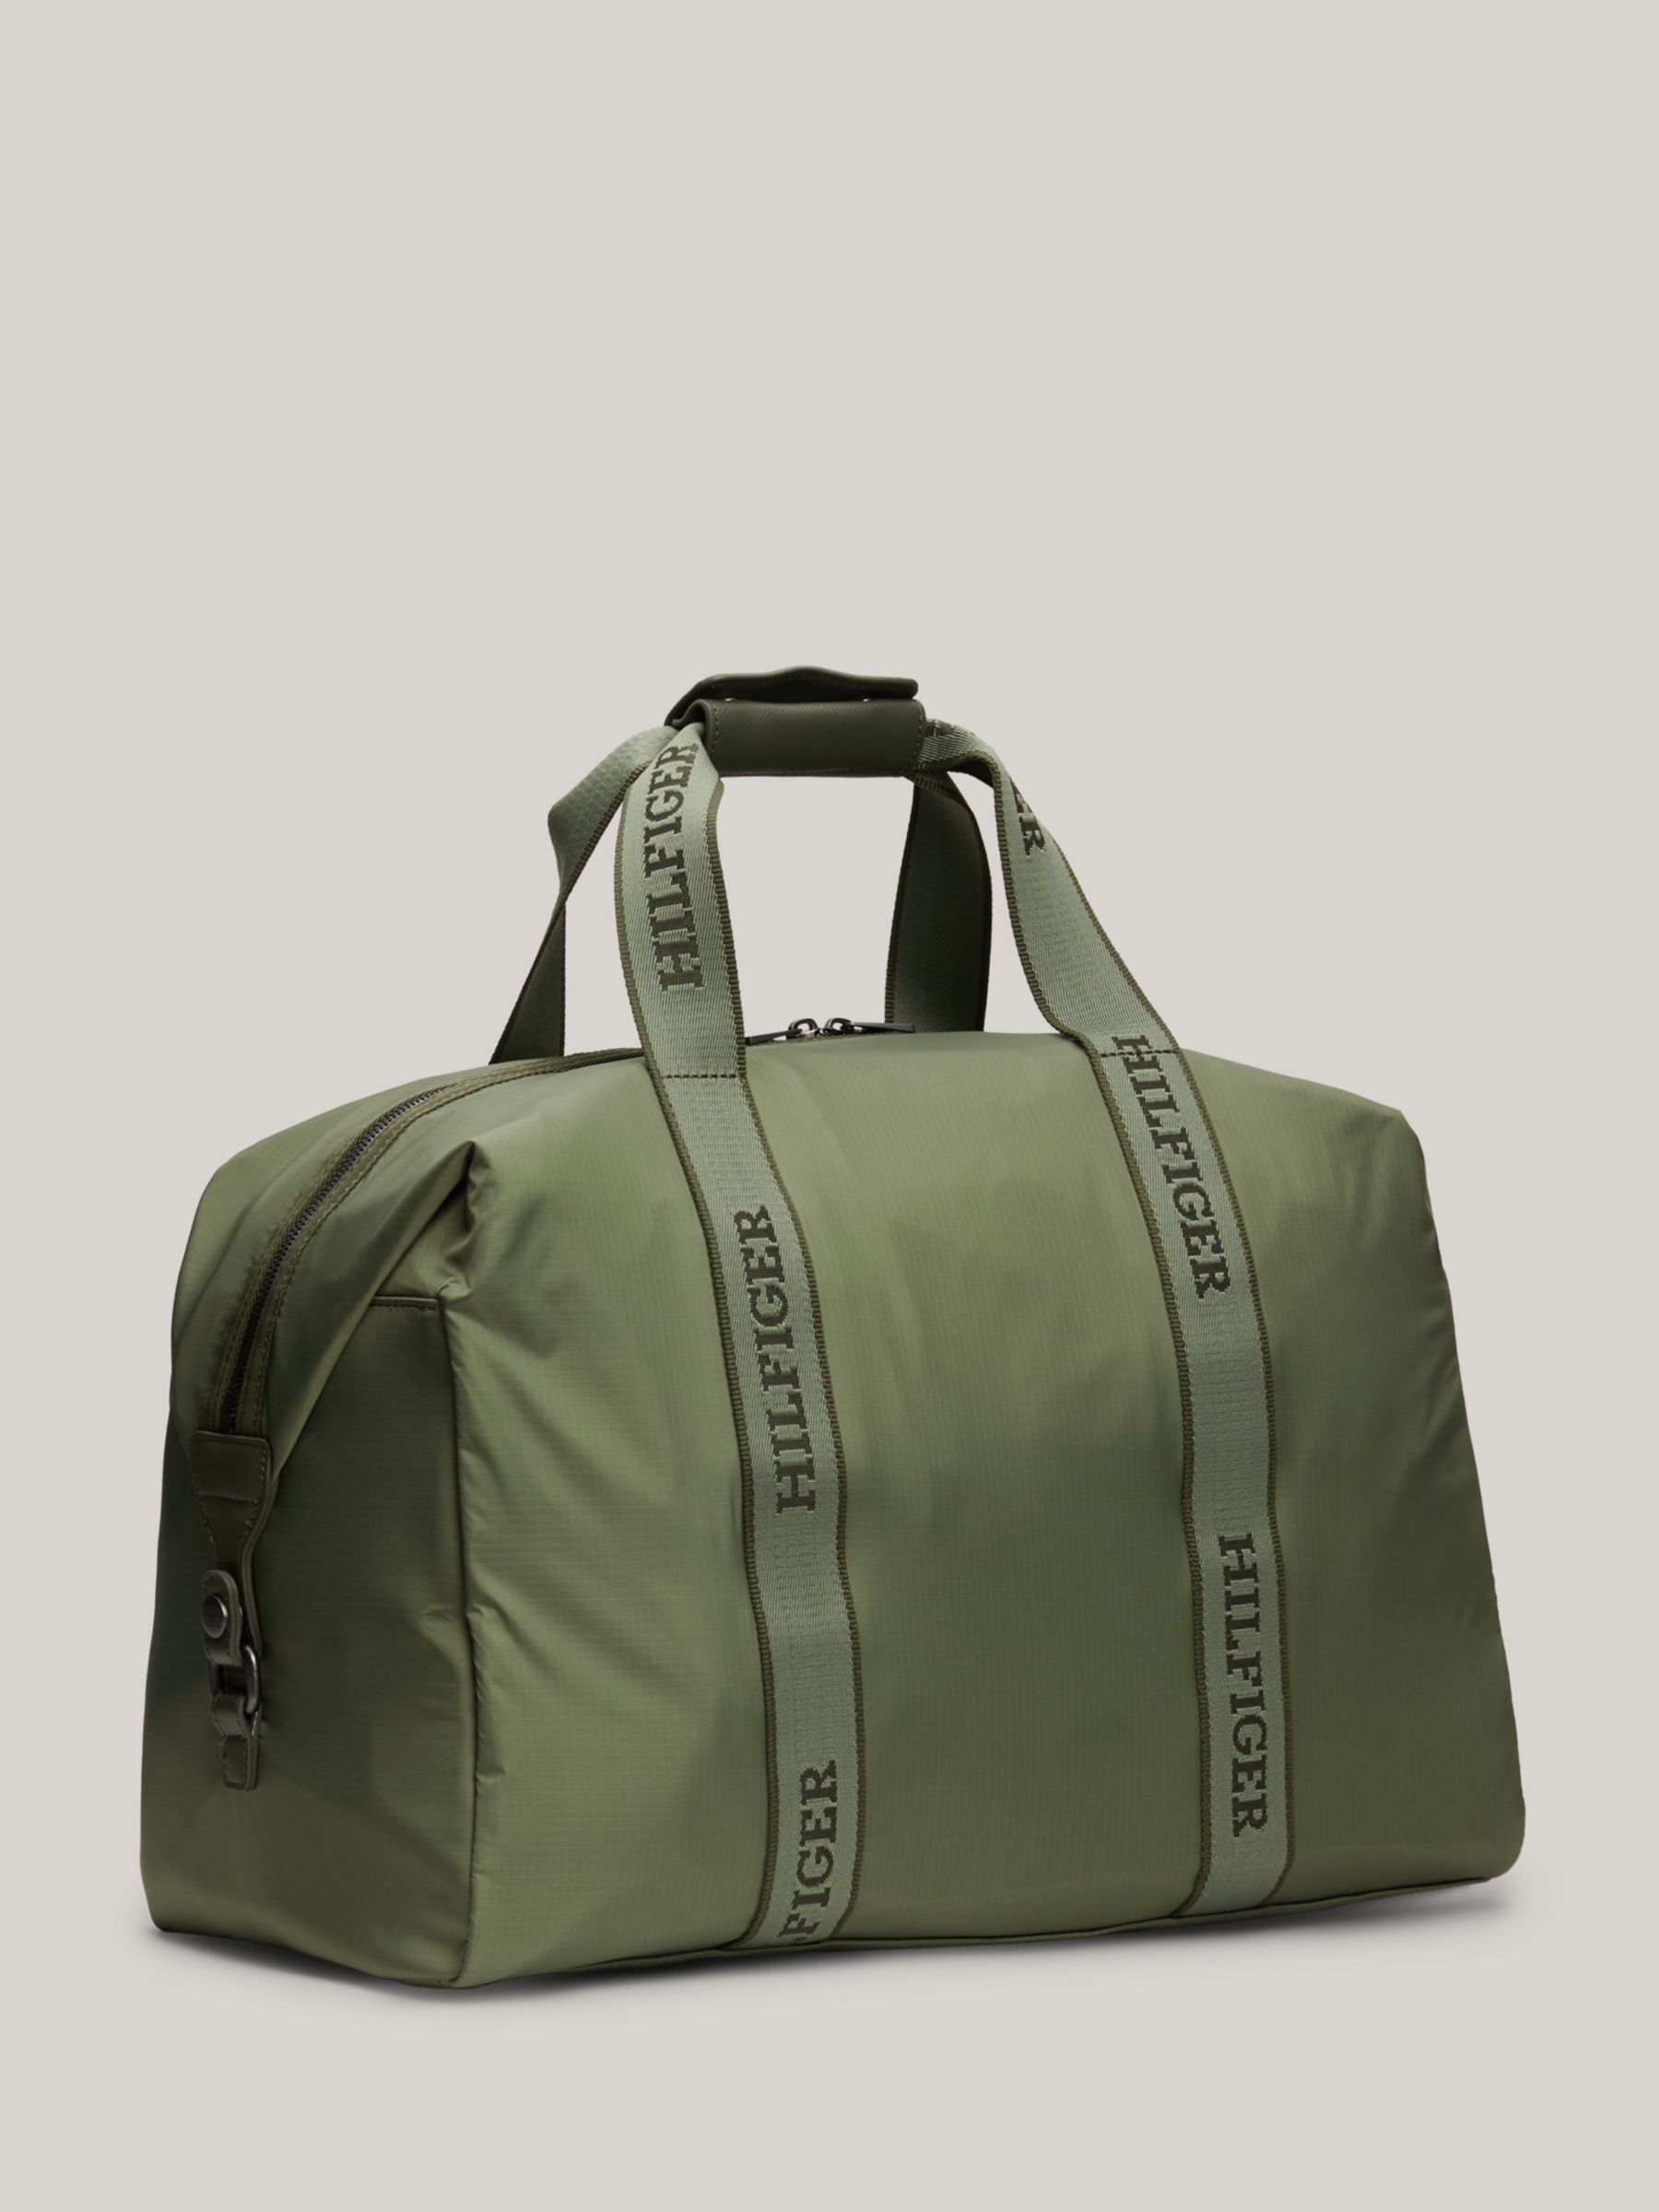 Tommy Hilfiger Summer Duffle Bag, Green, One Size